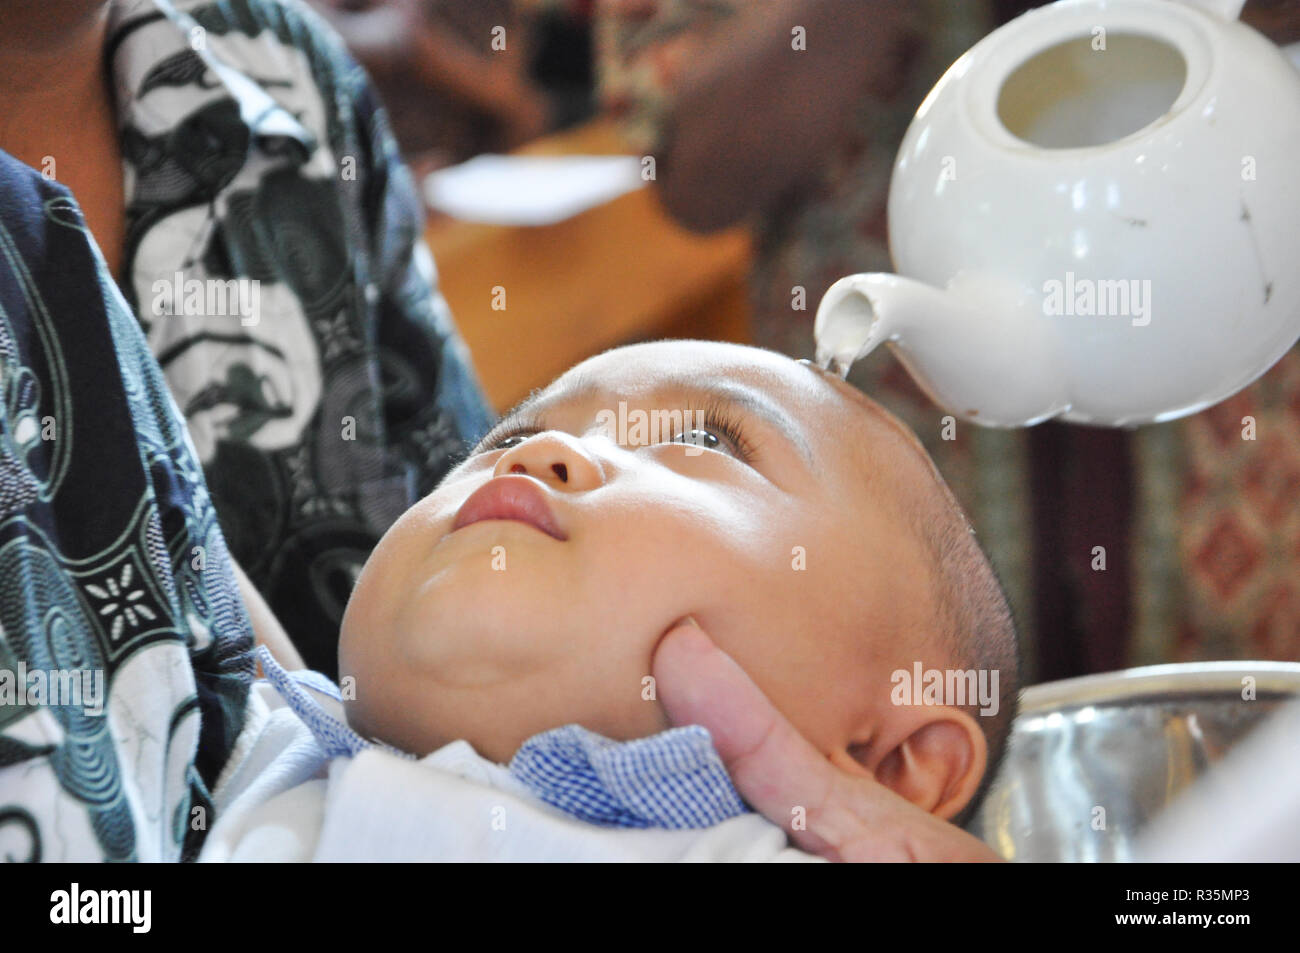 Batam, Indonesia. A priest pours water on the head of a chils during baptism procession. Stock Photo